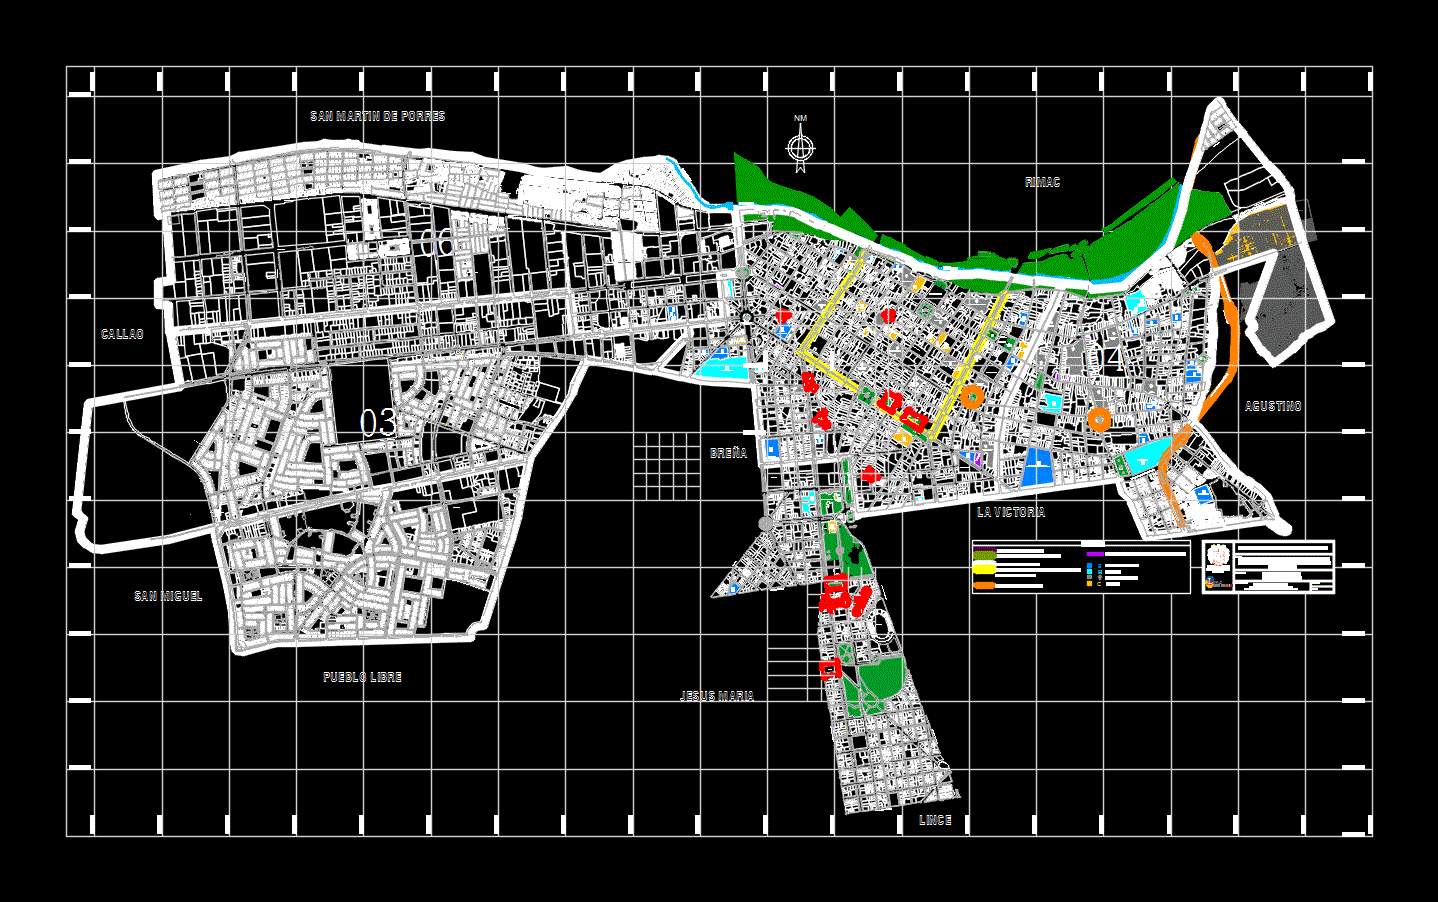 MAP OF THE CENTER OF LIMA